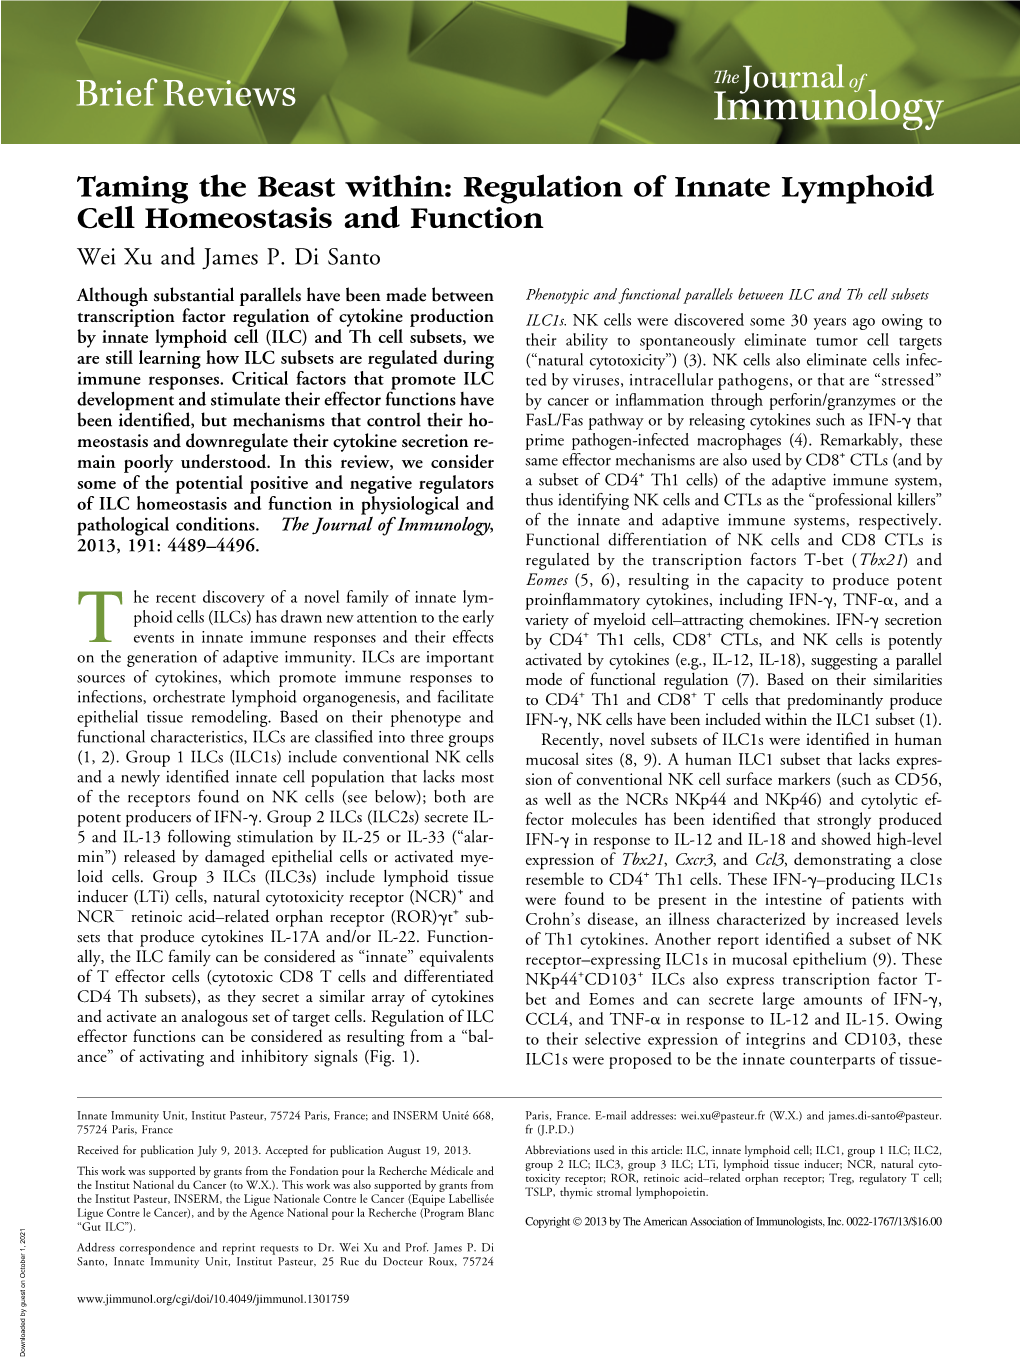 Function Innate Lymphoid Cell Homeostasis and Taming the Beast